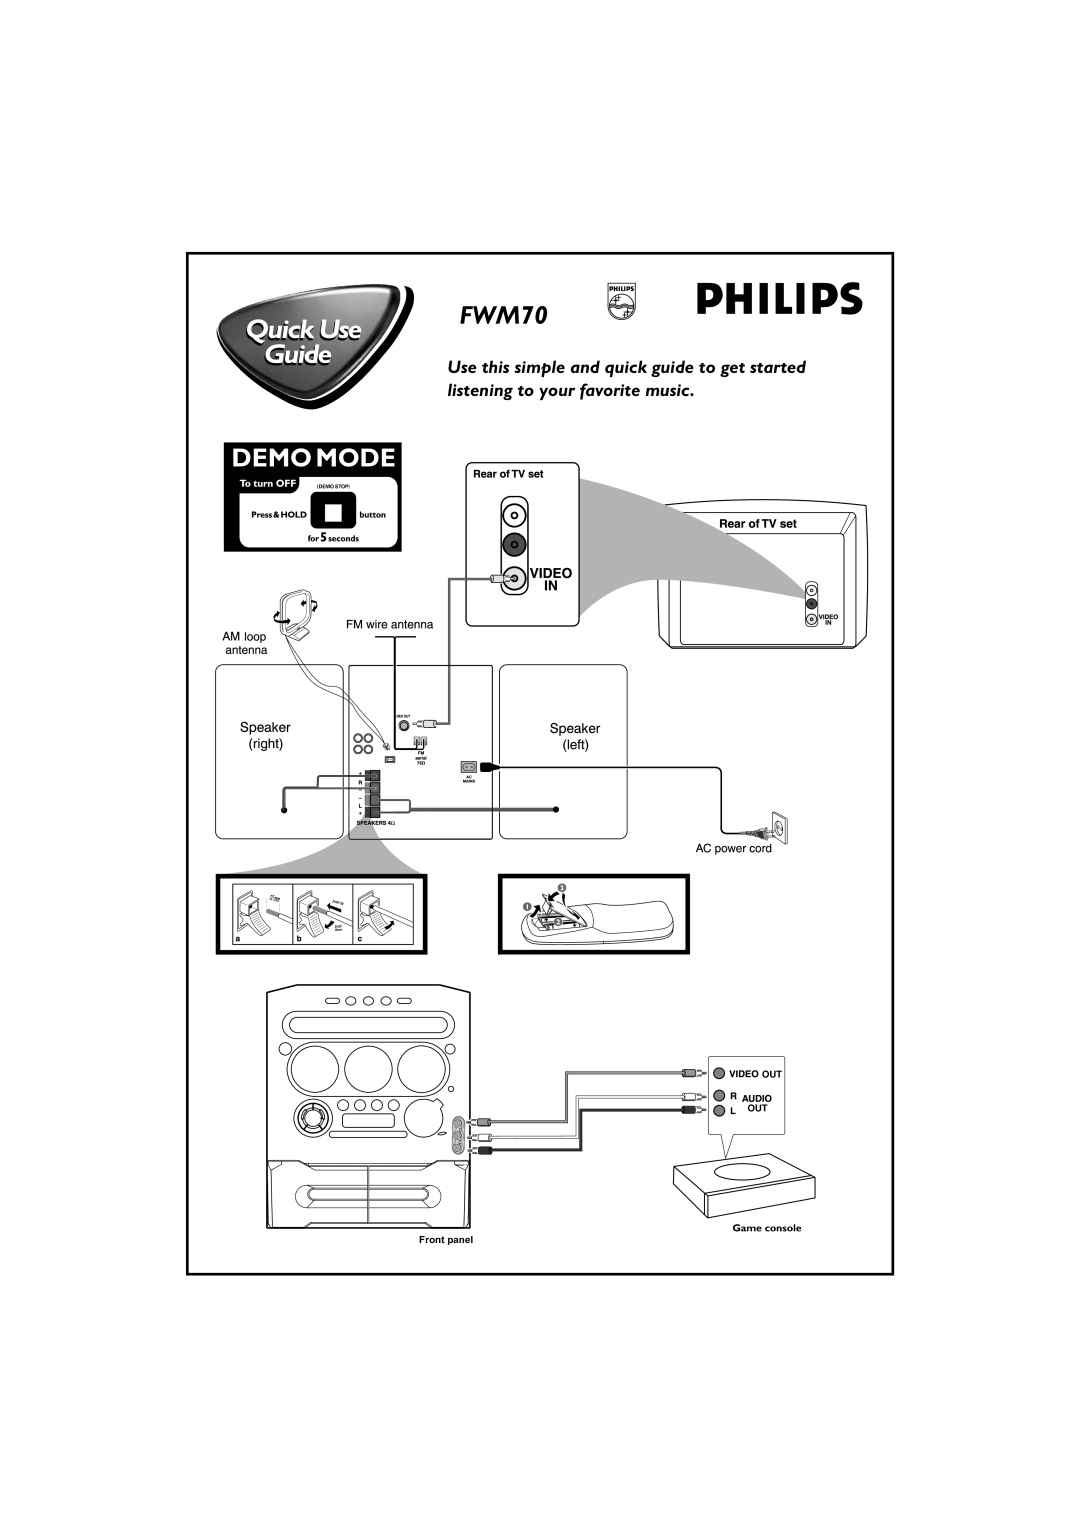 Philips FWM70/07B manual Demo Mode, Game console, Out Out, Front panel, Demo Stop 